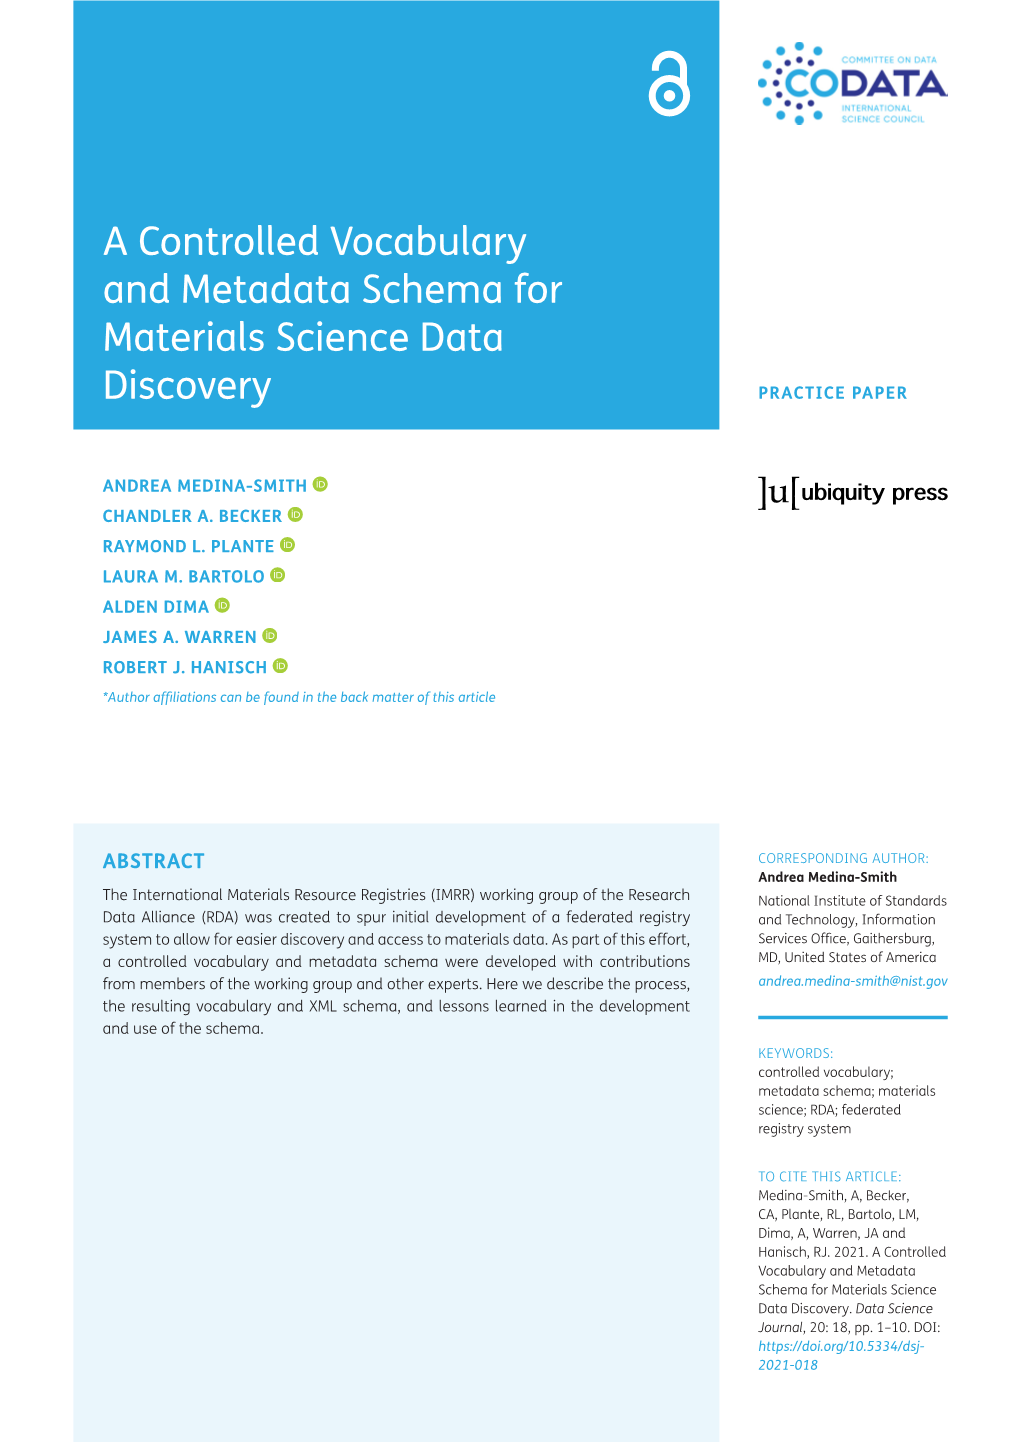 A Controlled Vocabulary and Metadata Schema for Materials Science Data